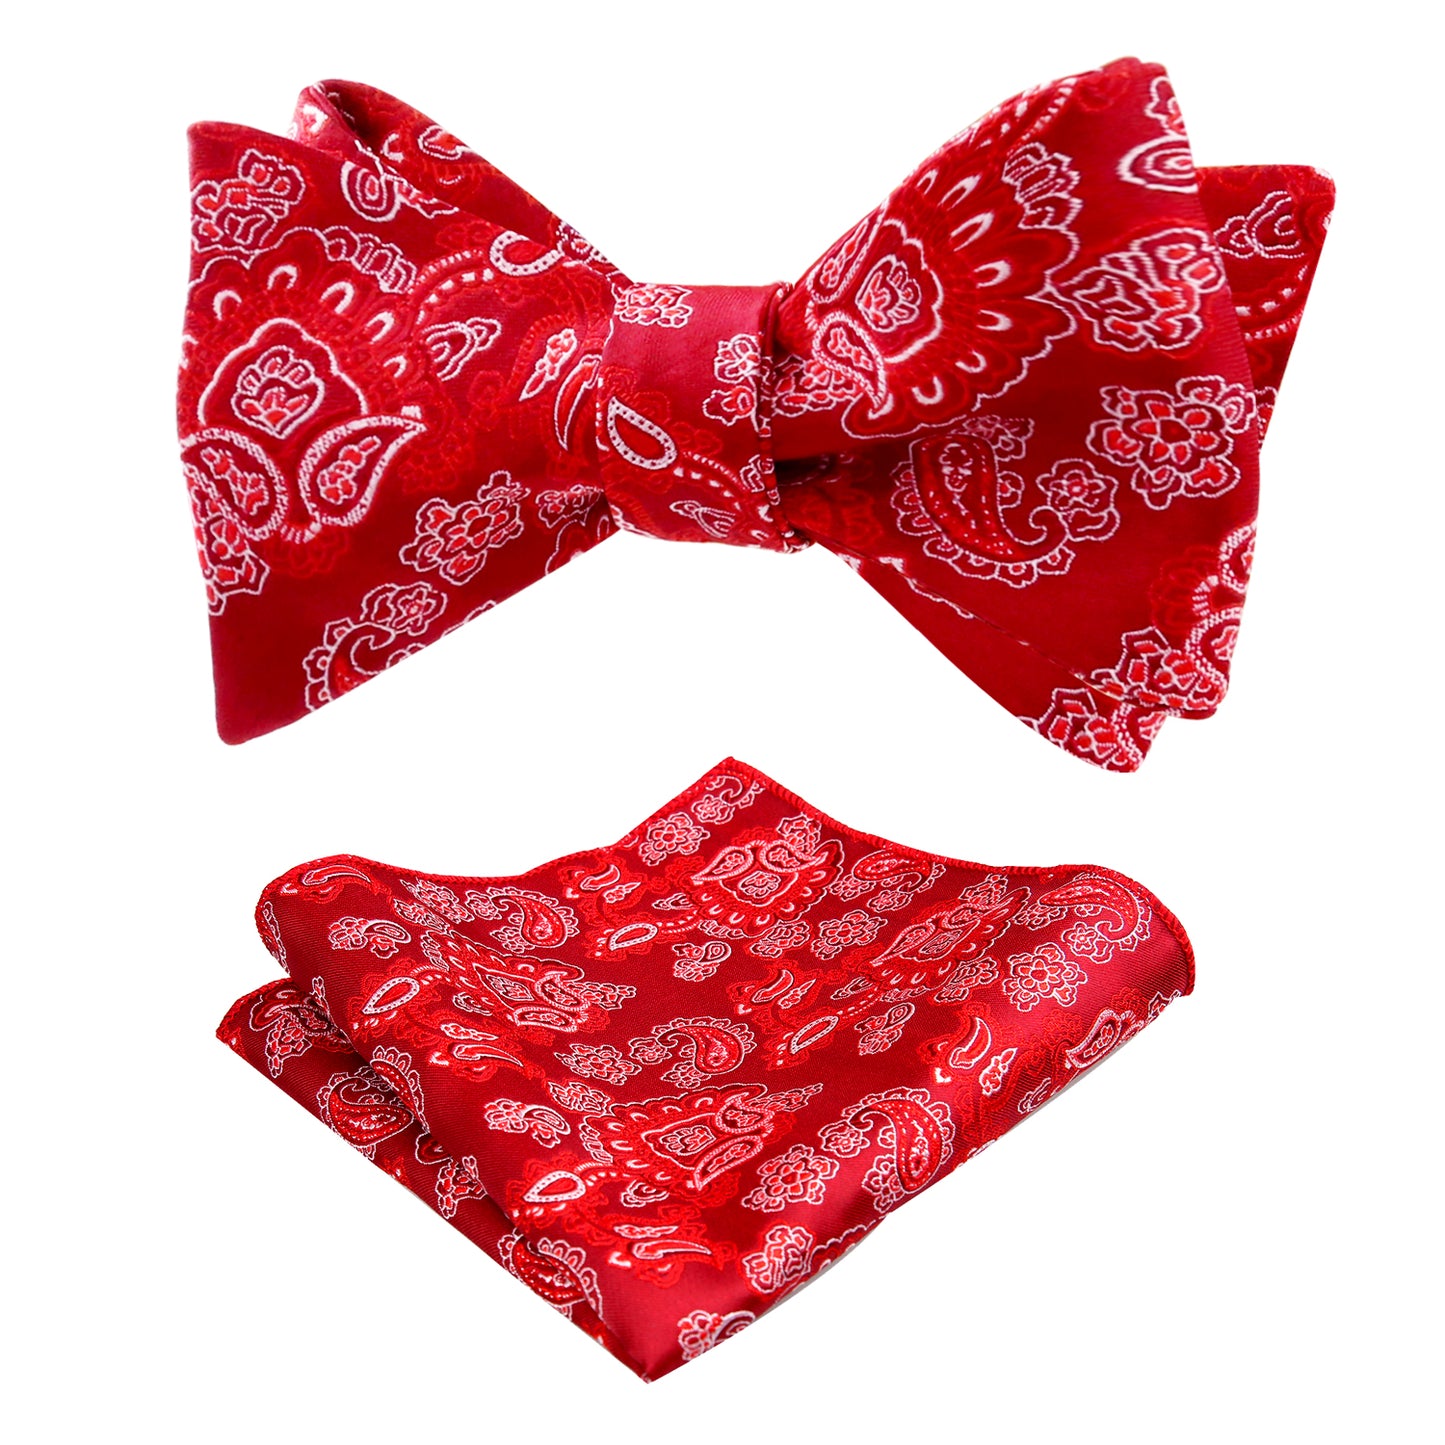 Alizeal Men's Wedding Woven Paisley Self-tied Bow Tie and Hanky Set #091